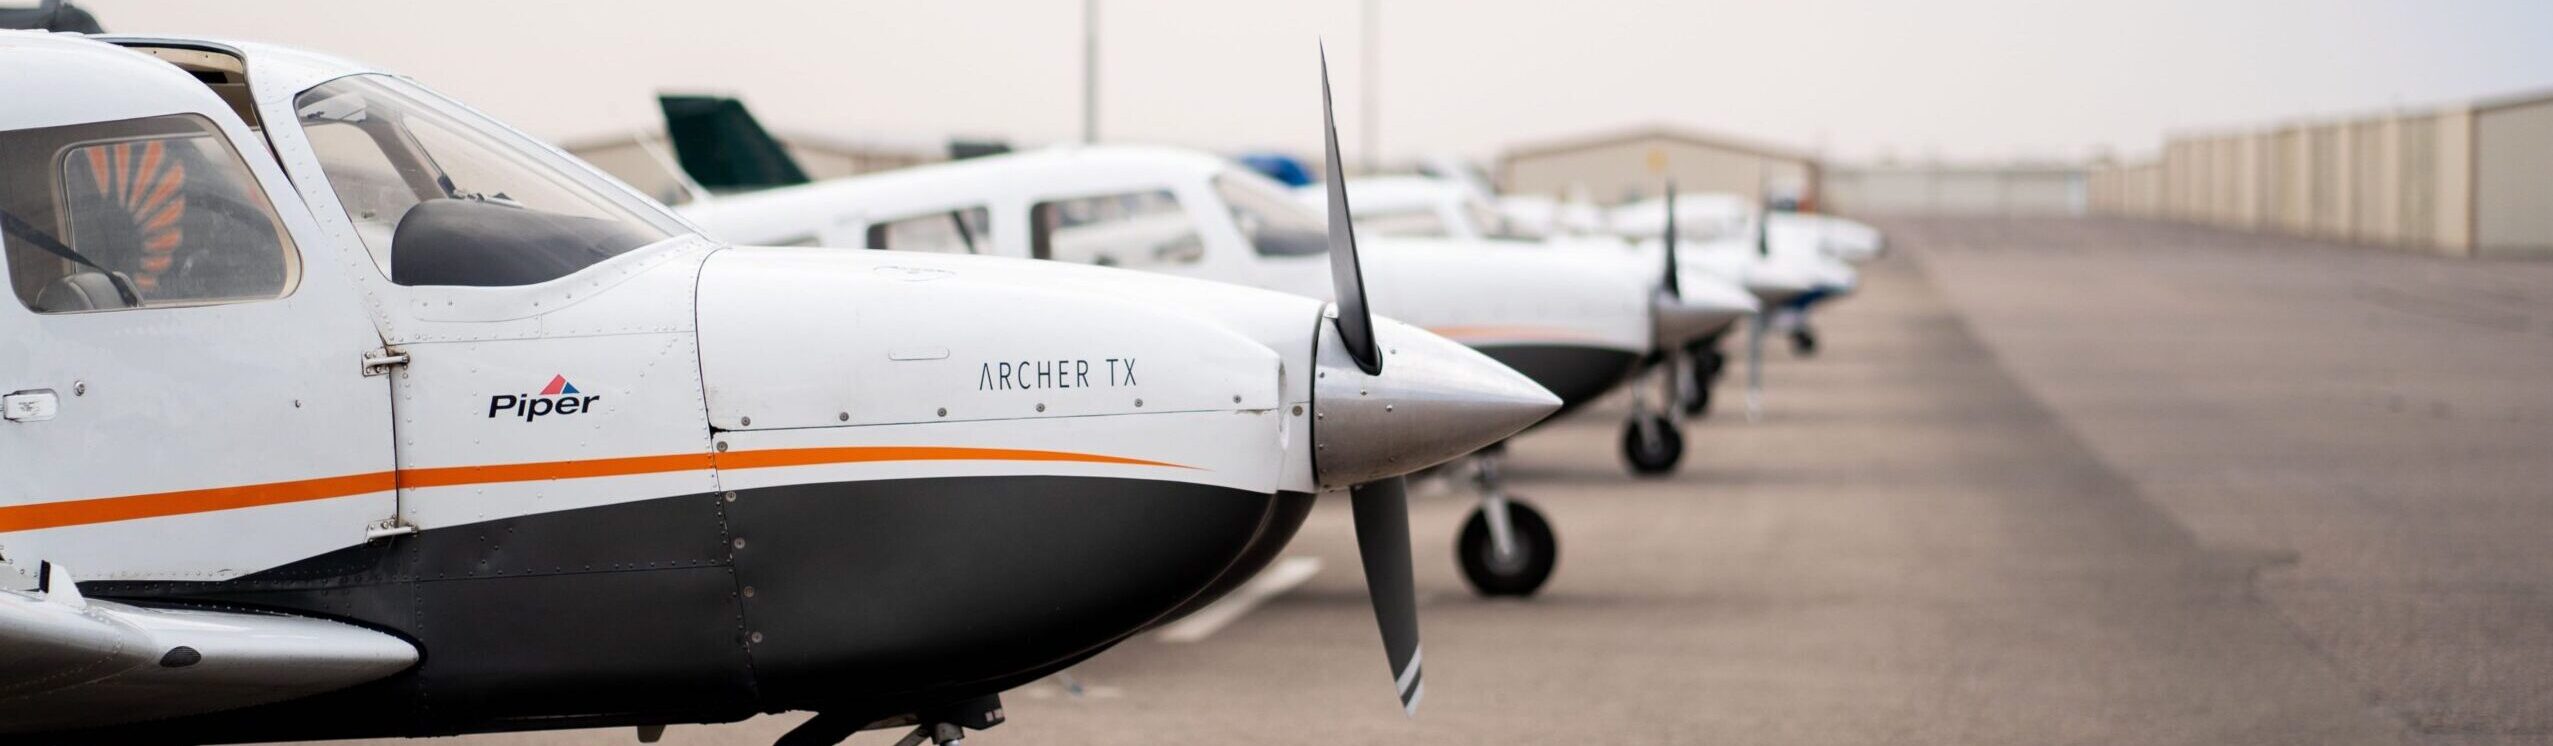 AeroGuard Expands Fleet by 3 Aircraft in Recent Weeks - Plans to Add 20+ more in 2023.